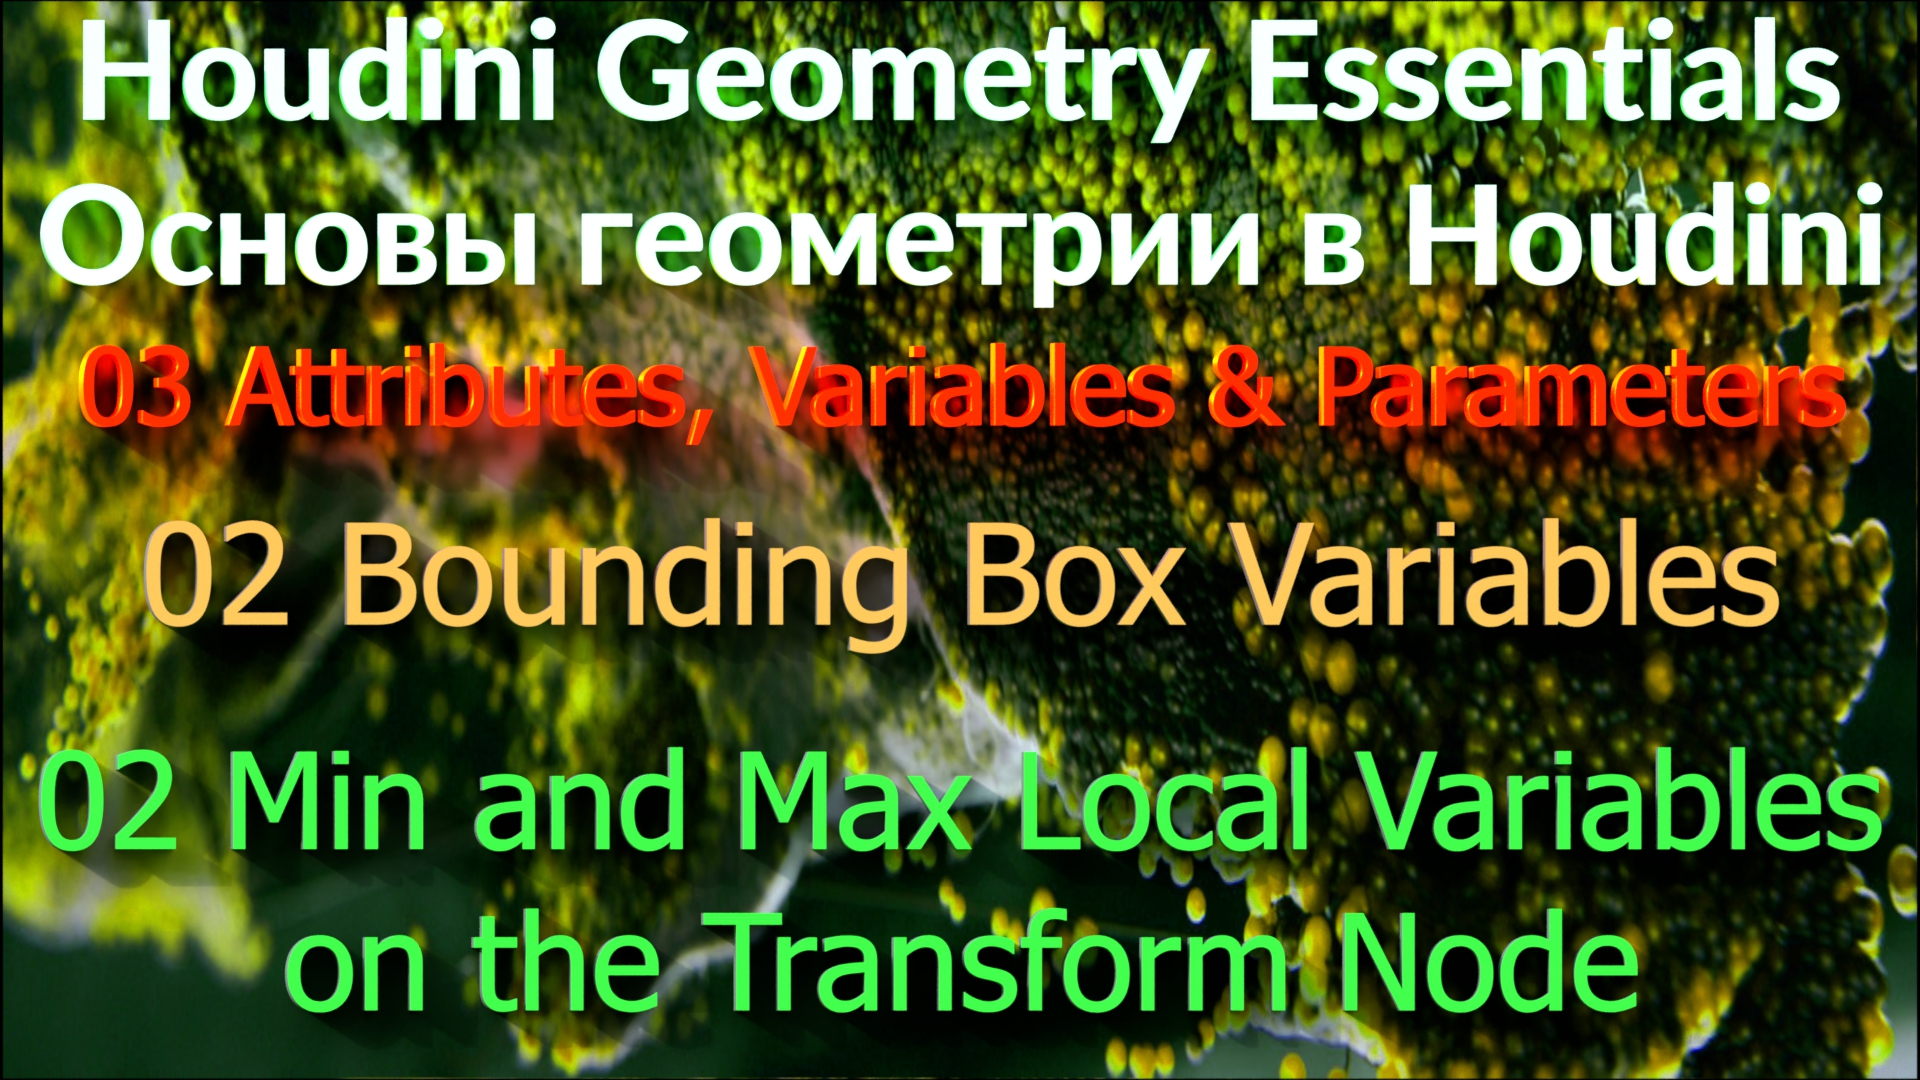 03_02_02 Min and Max Local Variables on the Transform Node